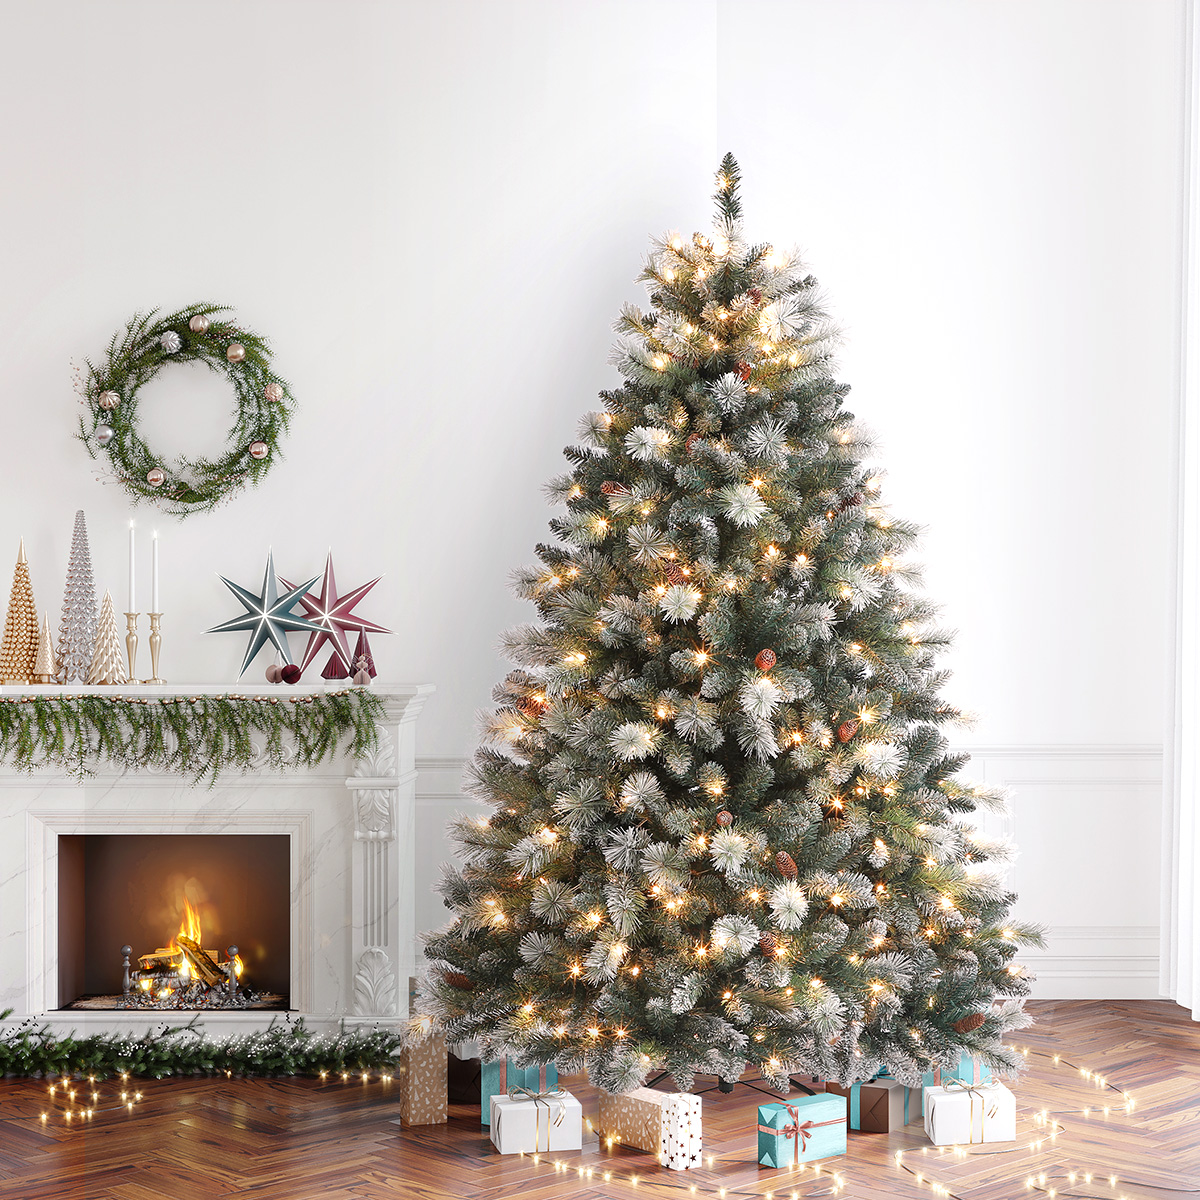 Twinkly Pre-Lit 7.5' Vermont Spruce Artificial Christmas Tree - Walmart.com